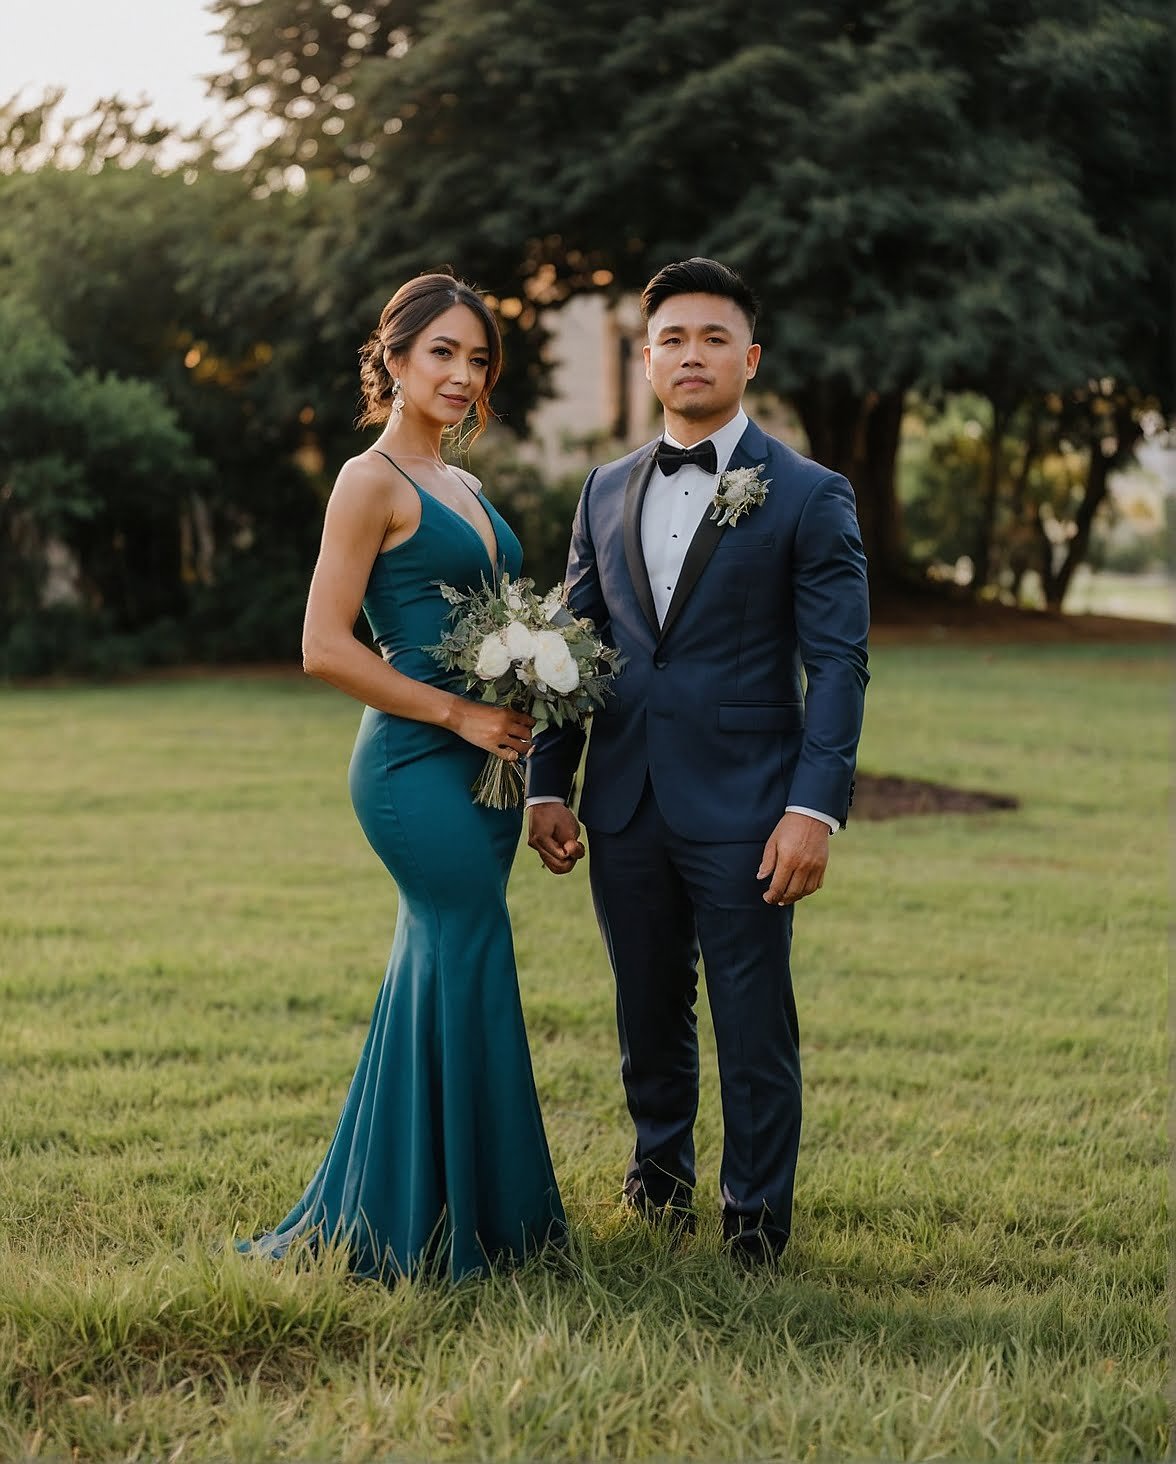 Teal Twilight: Evening Elegance for Couples